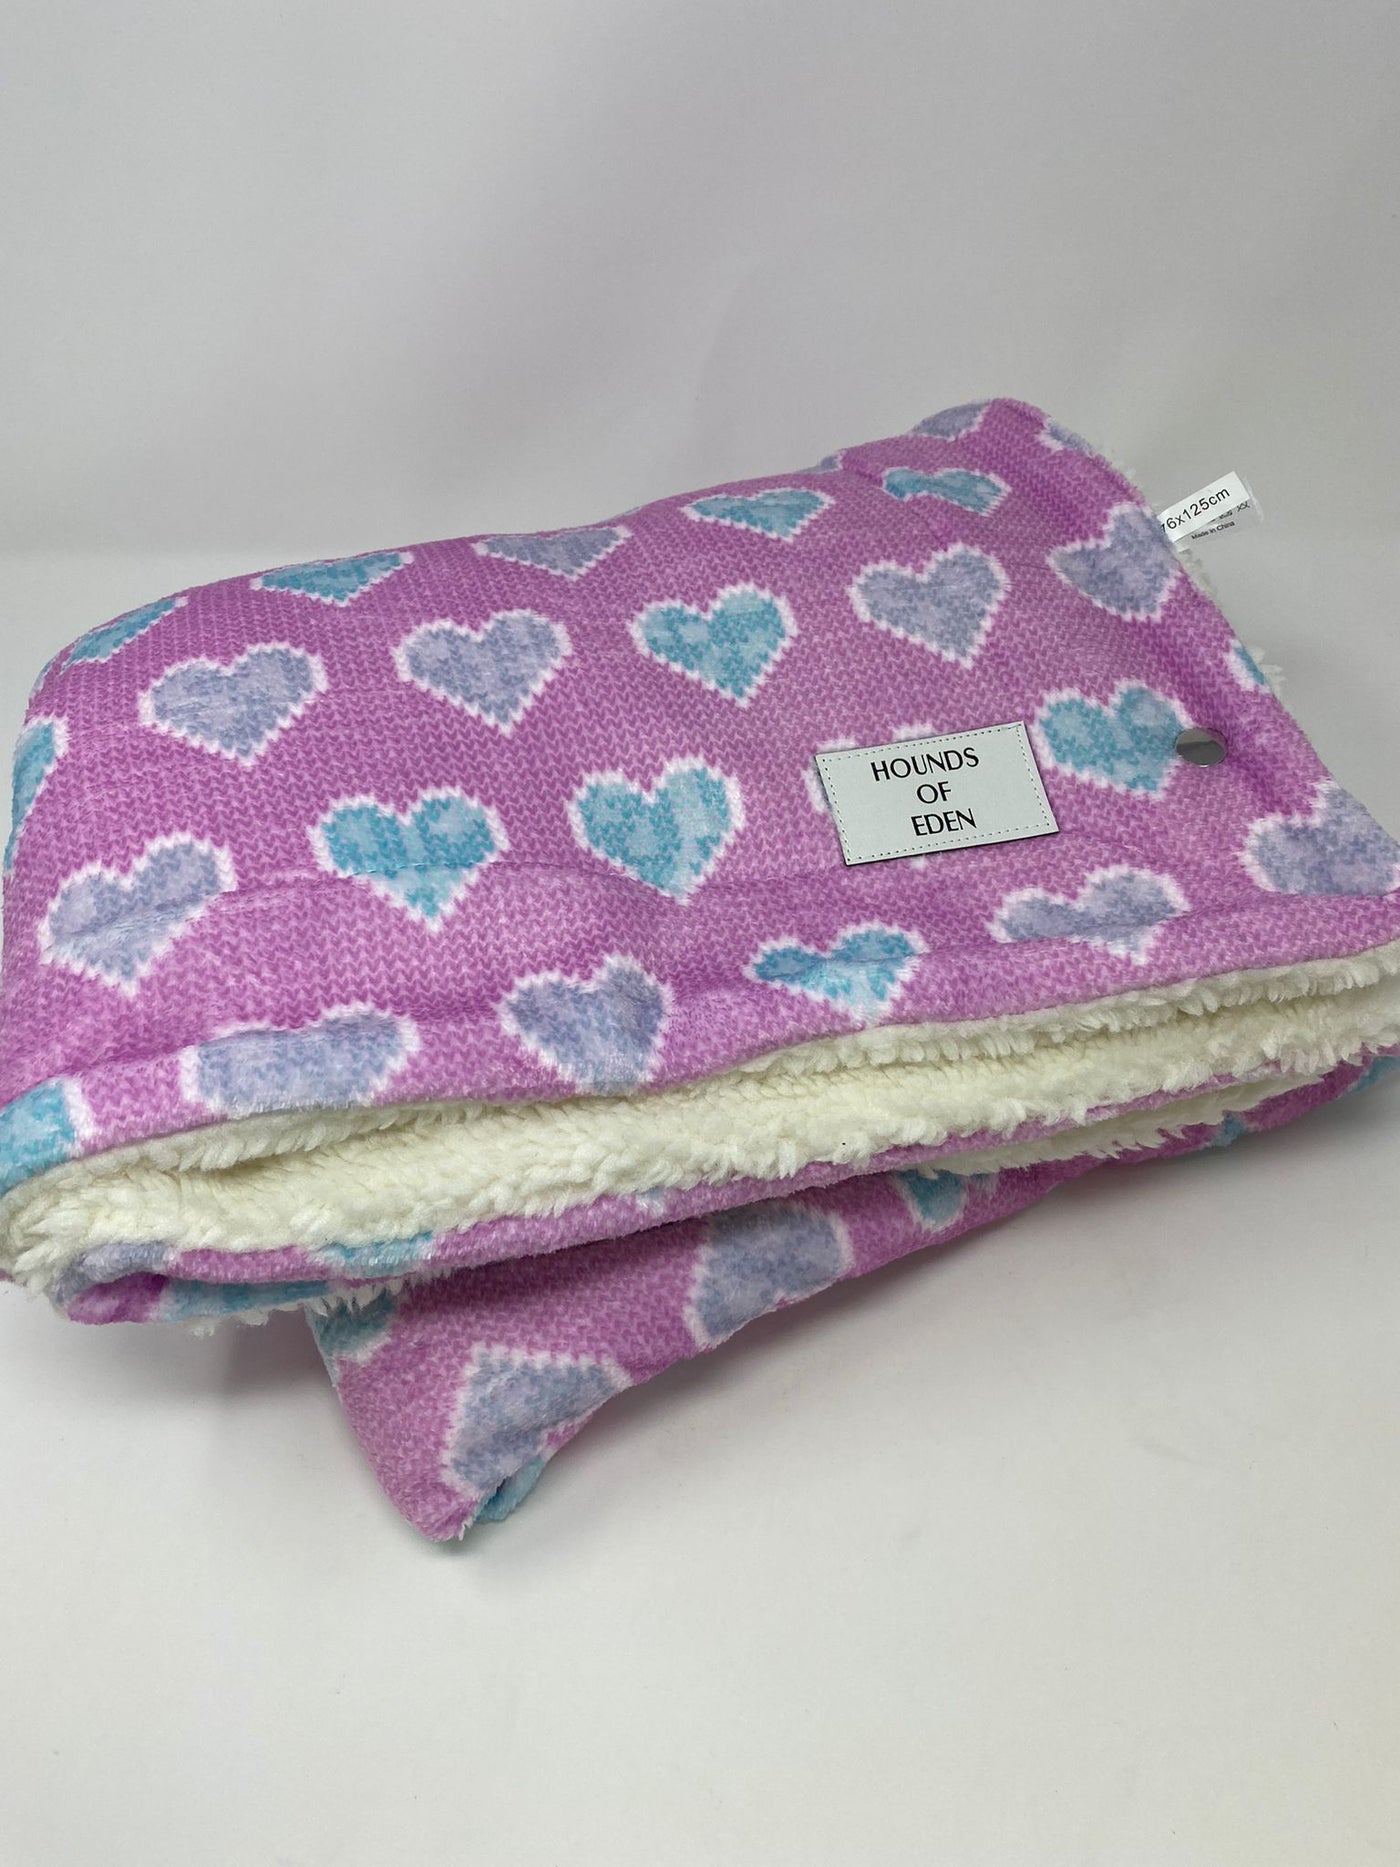 Outlet- 'DON’T GO BARKING MY HEART' SNUGGLE BLANKET - 0010